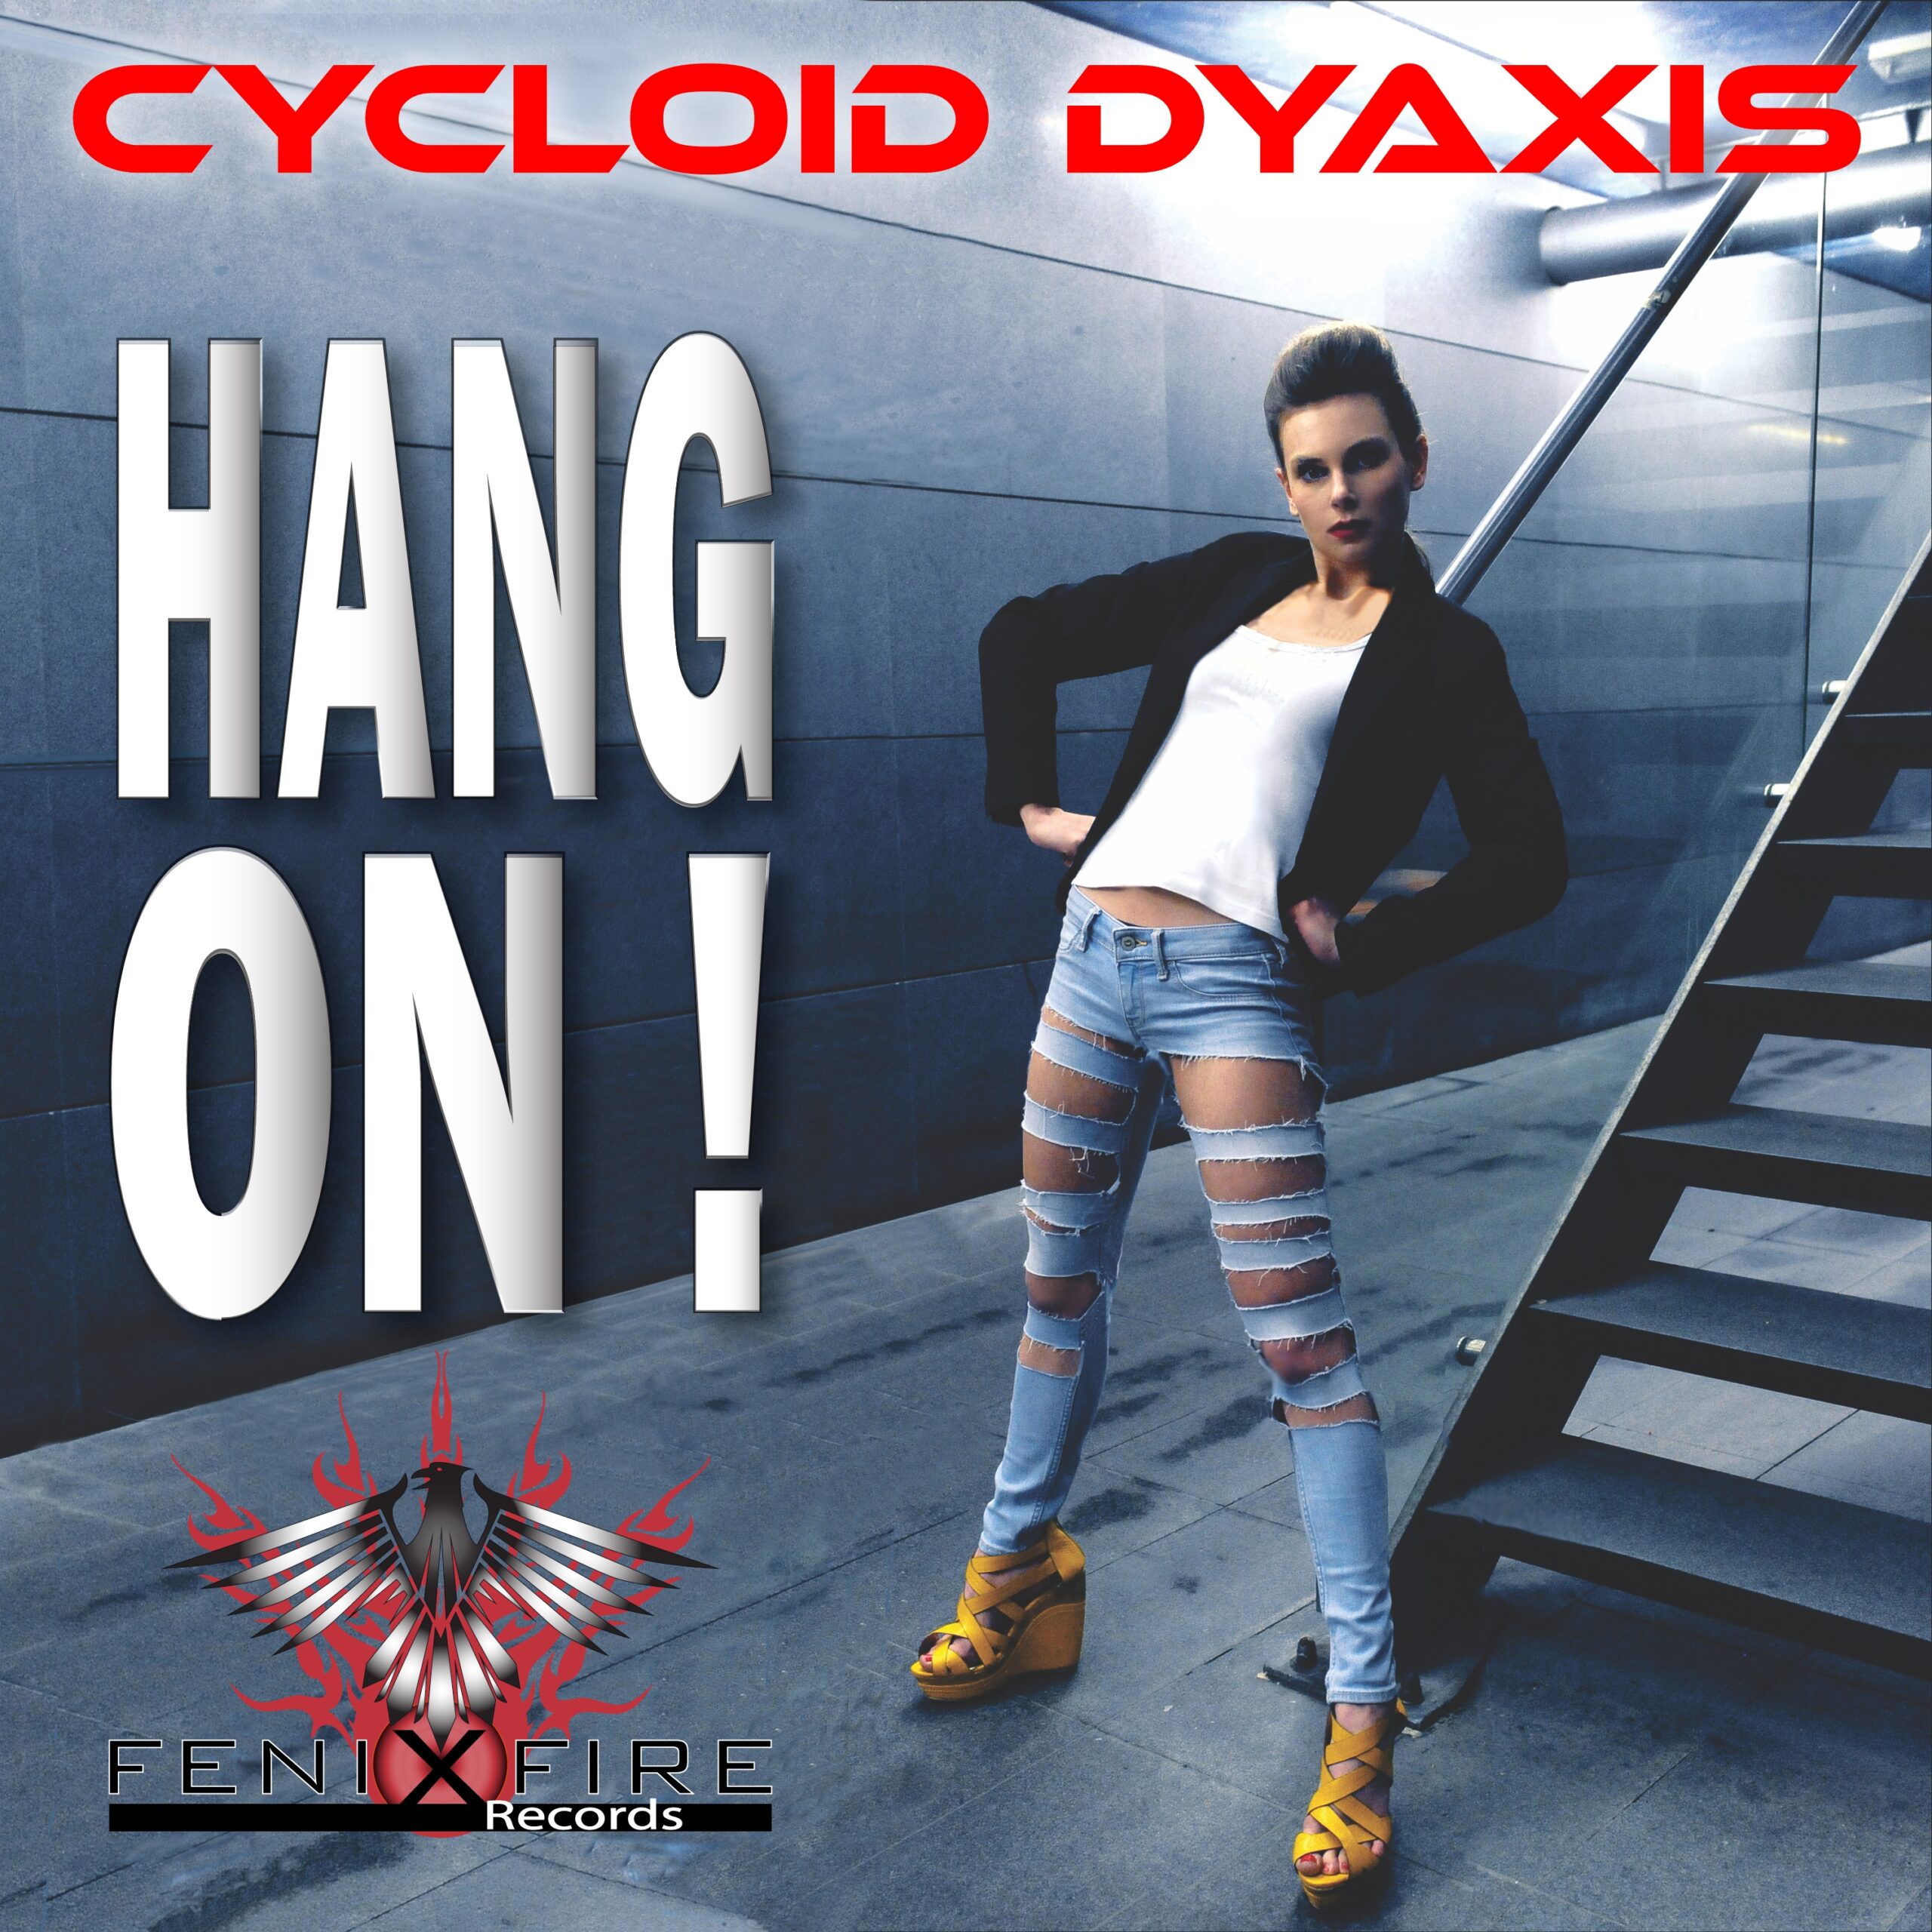 Cycloid Dyaxis - Hang On! [Fenix Fire Records]